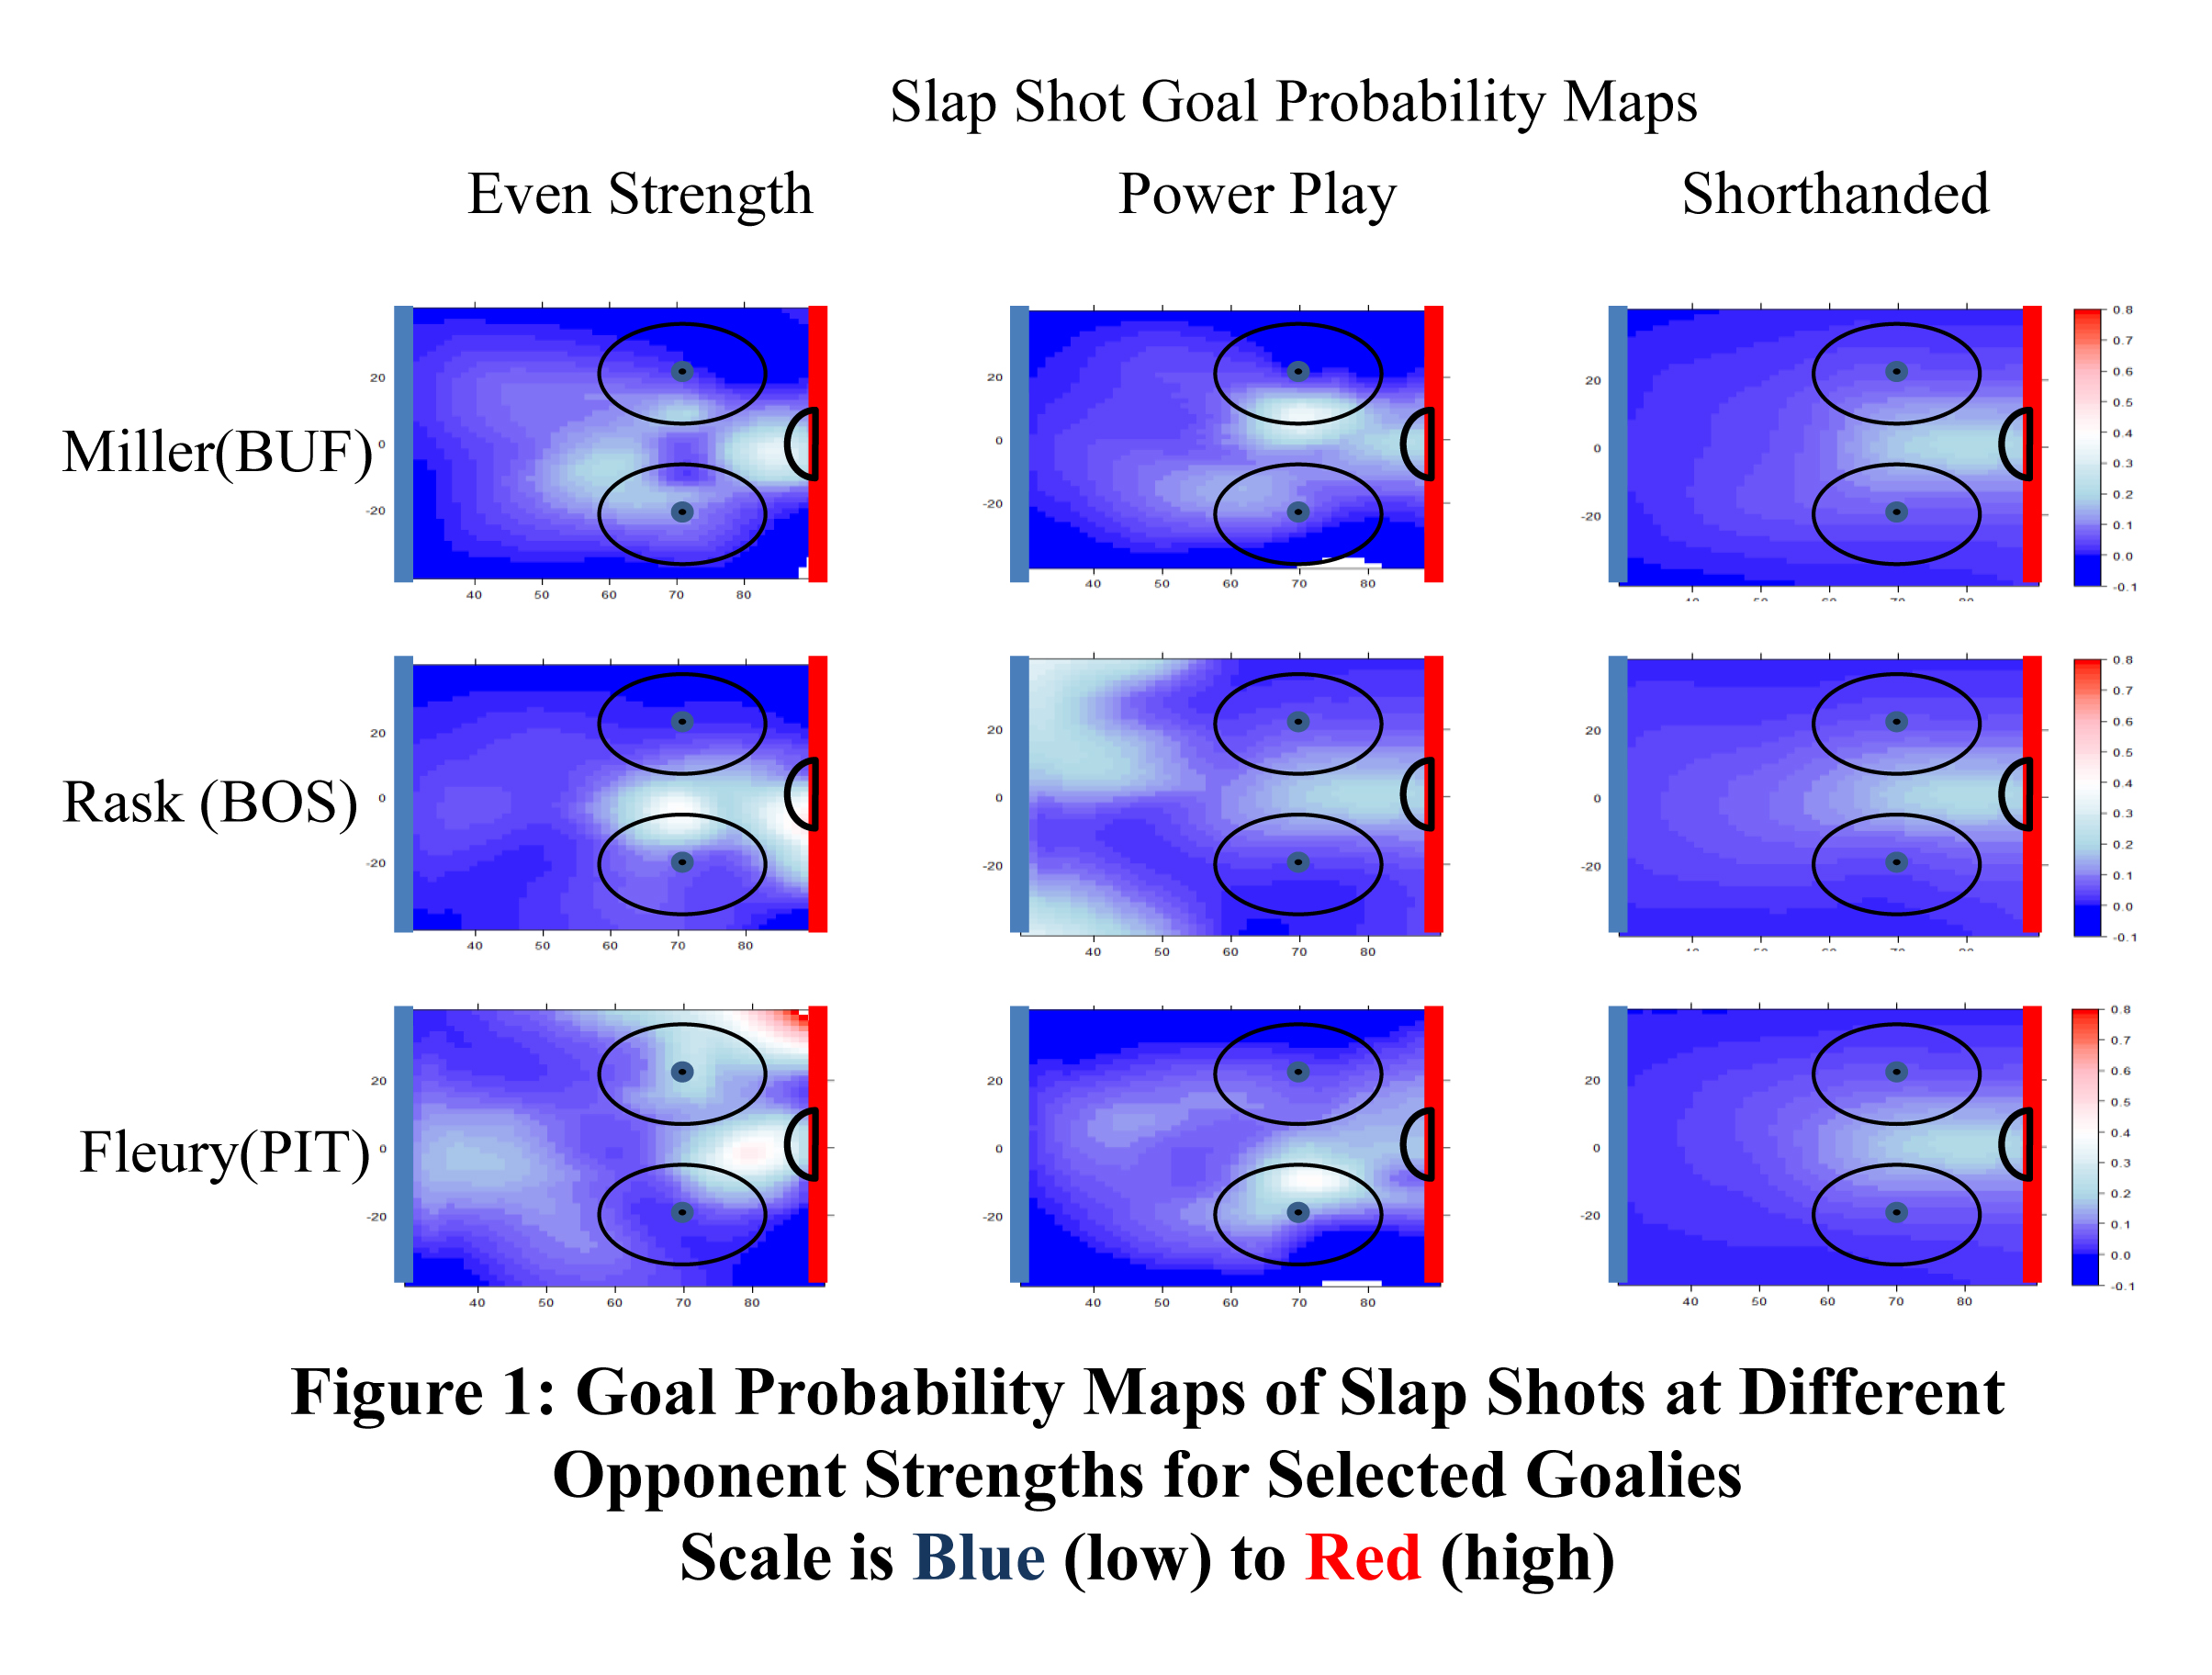 Figure of Goal Probability Maps of Slap Shots at Different Opponent Strengths for Selected Goalies